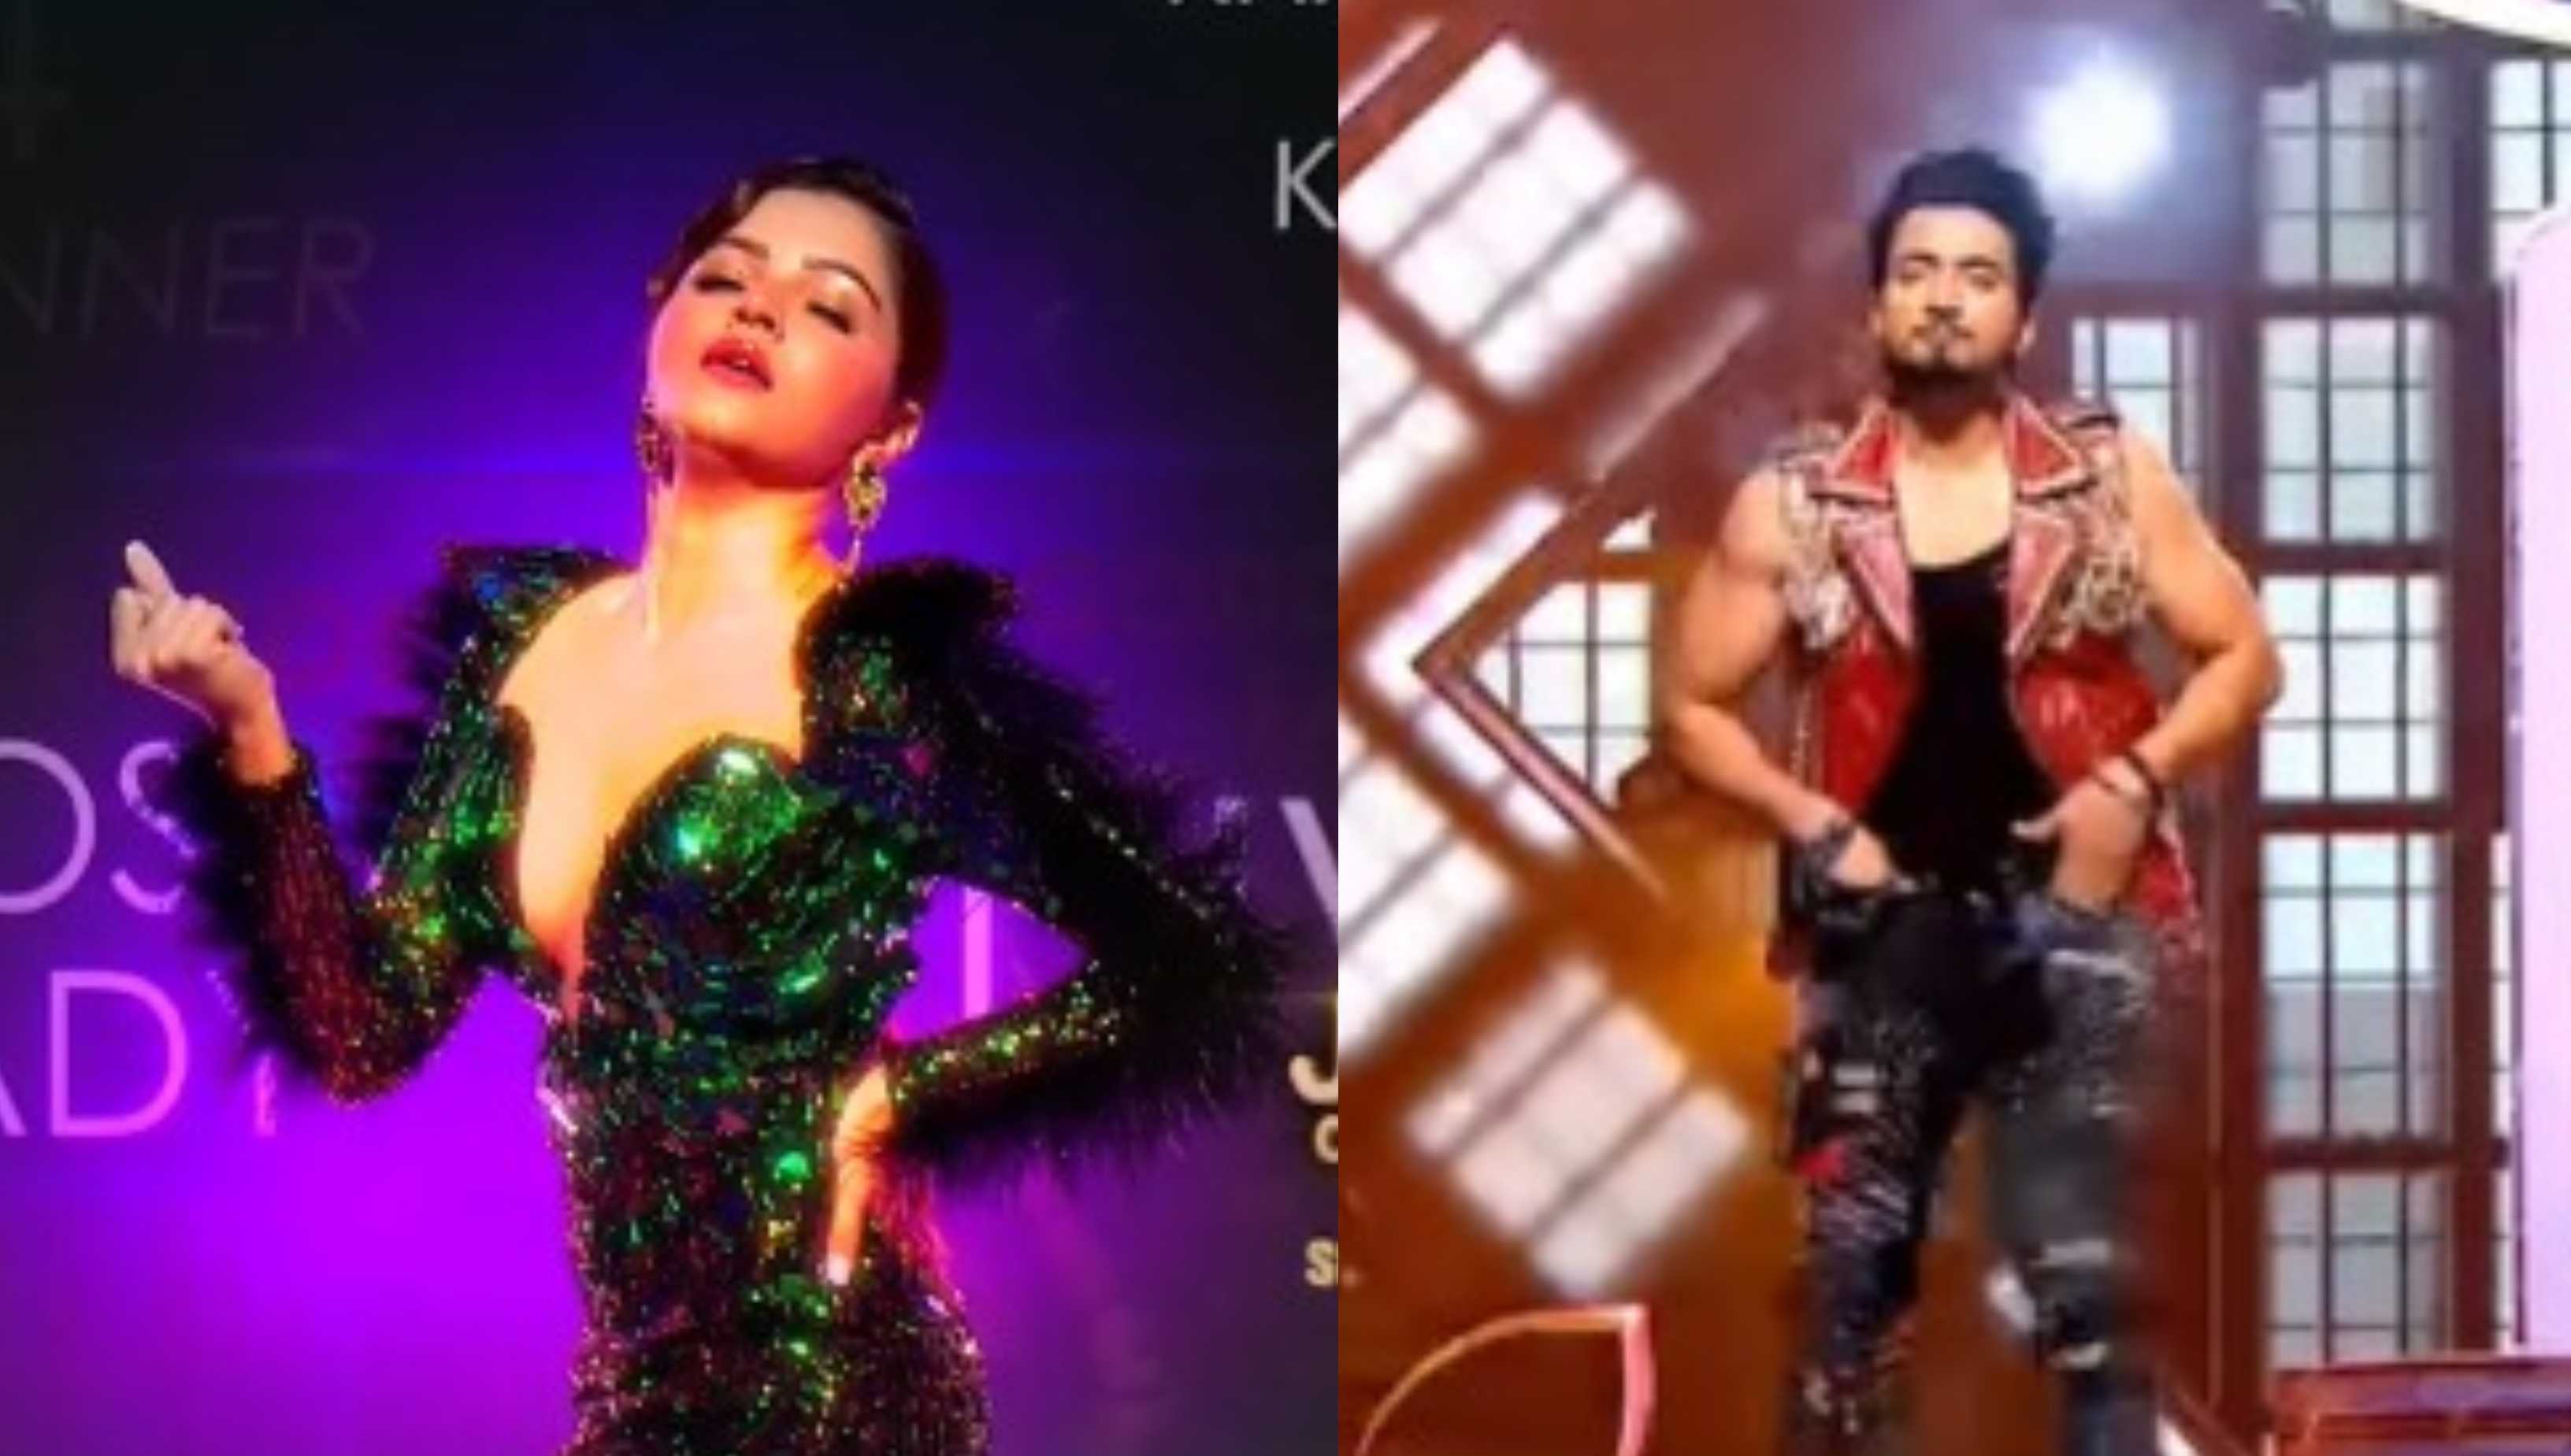 Jhalak Dikhhla Jaa 10 promo: Rubina Dilaik leaves Nora in awe with her moves; Faisal Shaikh gets a standing ovation